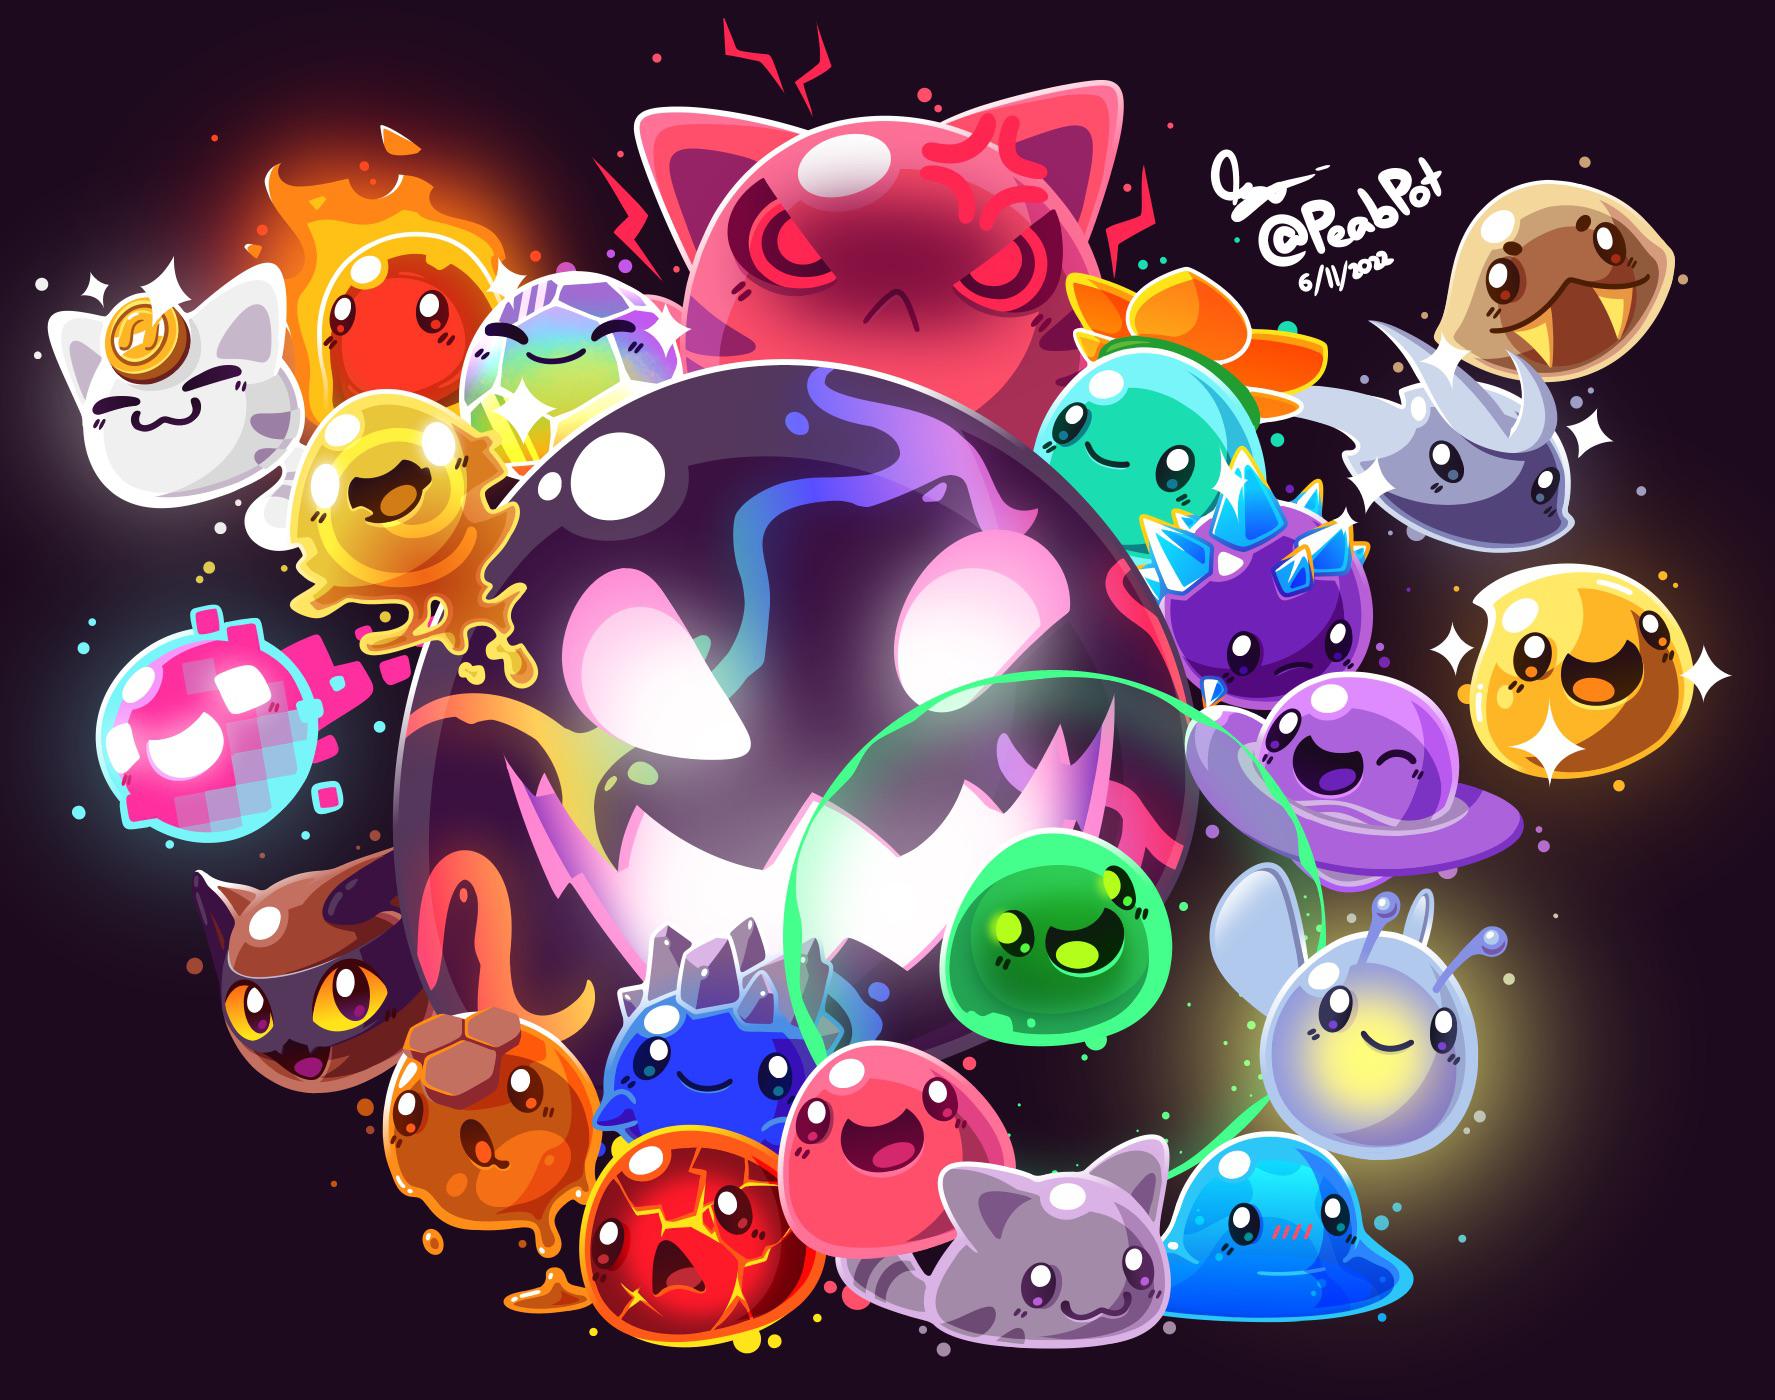 Drew all the main slimes from Slime Rancher